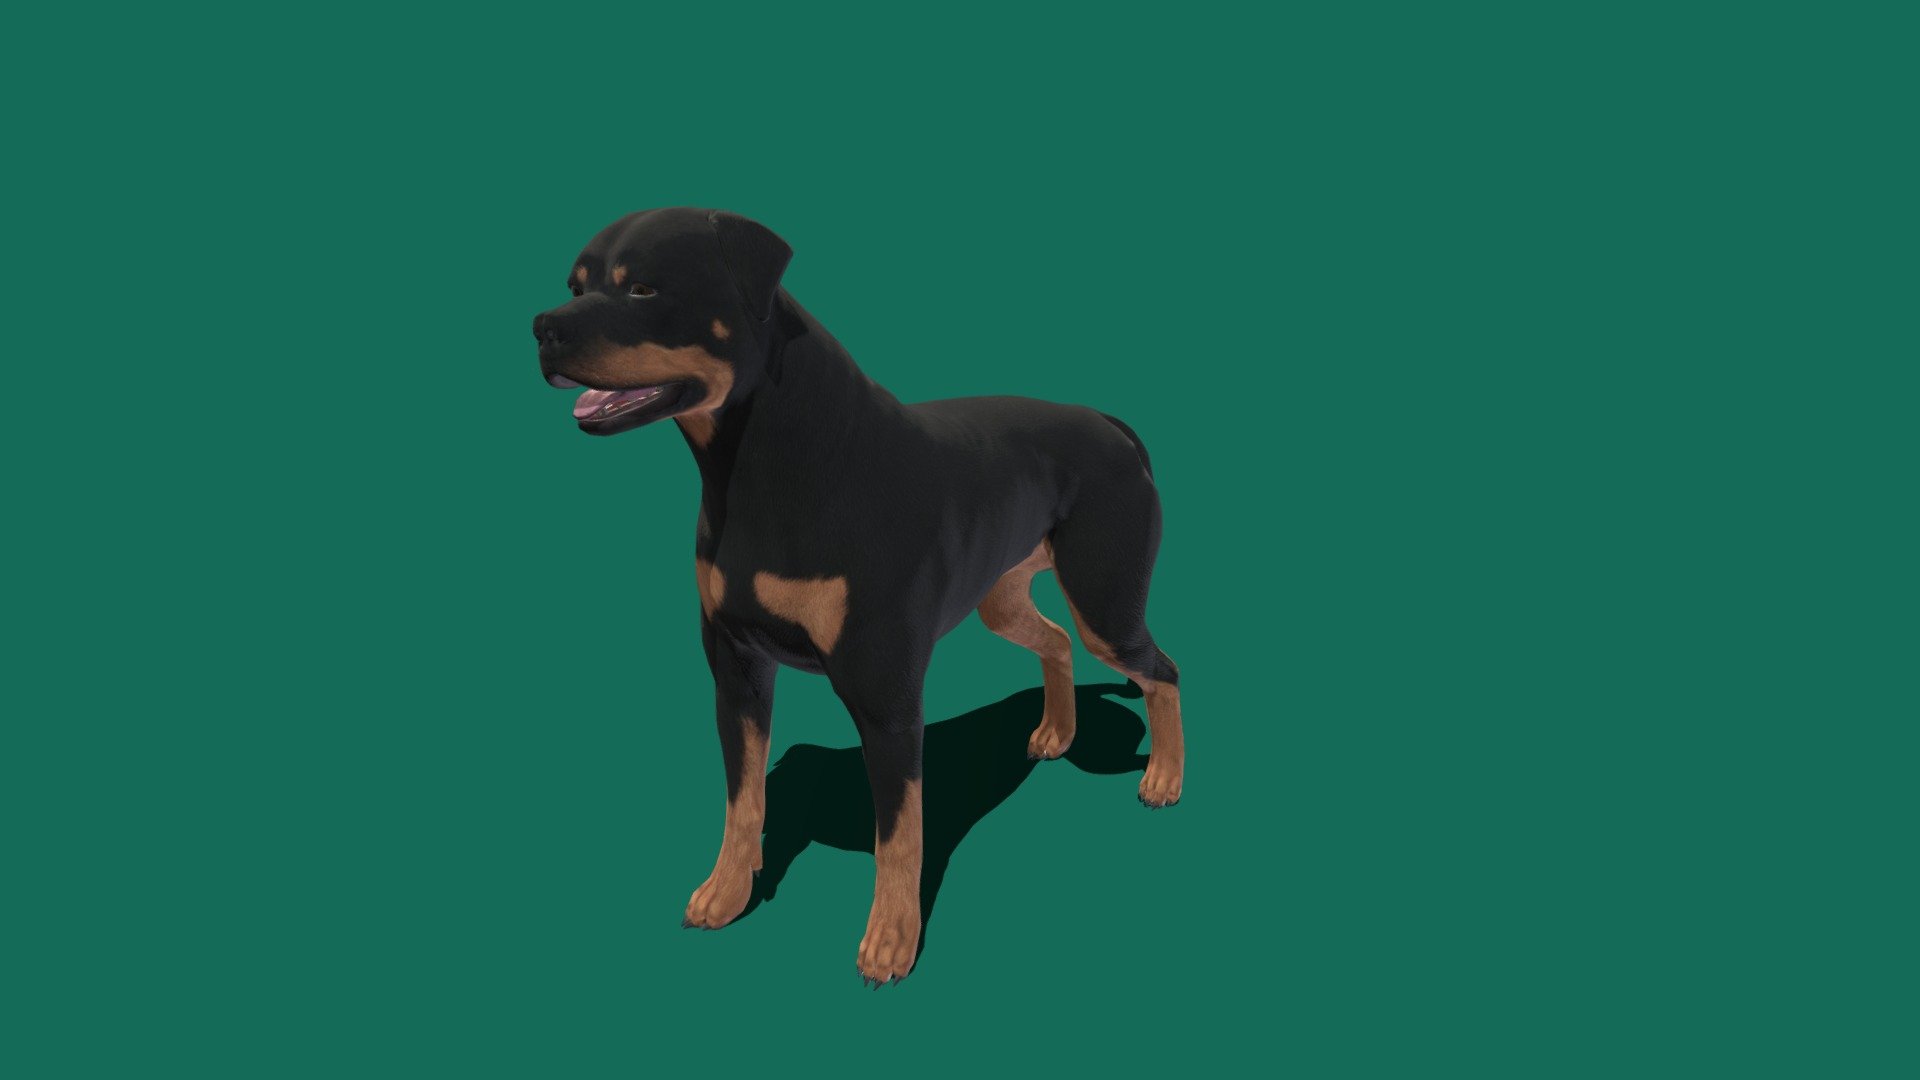 For Sore
The Rottweiler is a breed of domestic dog, regarded as medium-to-large or large. The dogs were known in German as Rottweiler Metzgerhund, meaning Rottweil butchers' dogs, because their main use was to herd livestock and pull carts laden with butchered meat to market 3d model